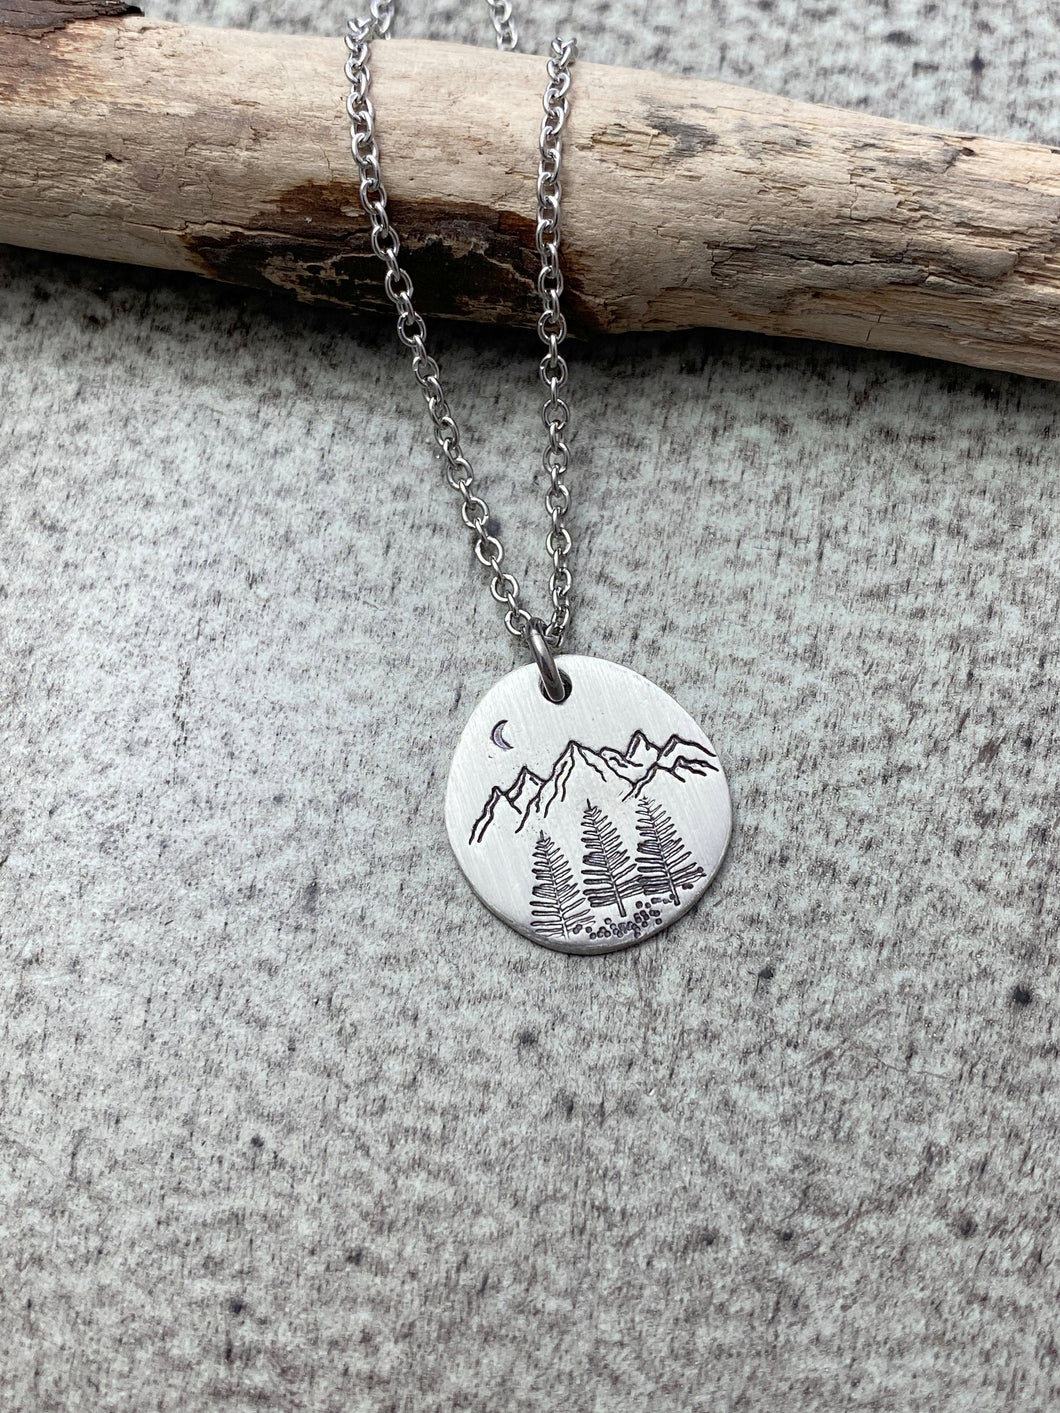 Mountain Range necklace with Pine trees and crescent moon - PNW necklace - Washington Necklace - Outdoors jewelry - gift for friend